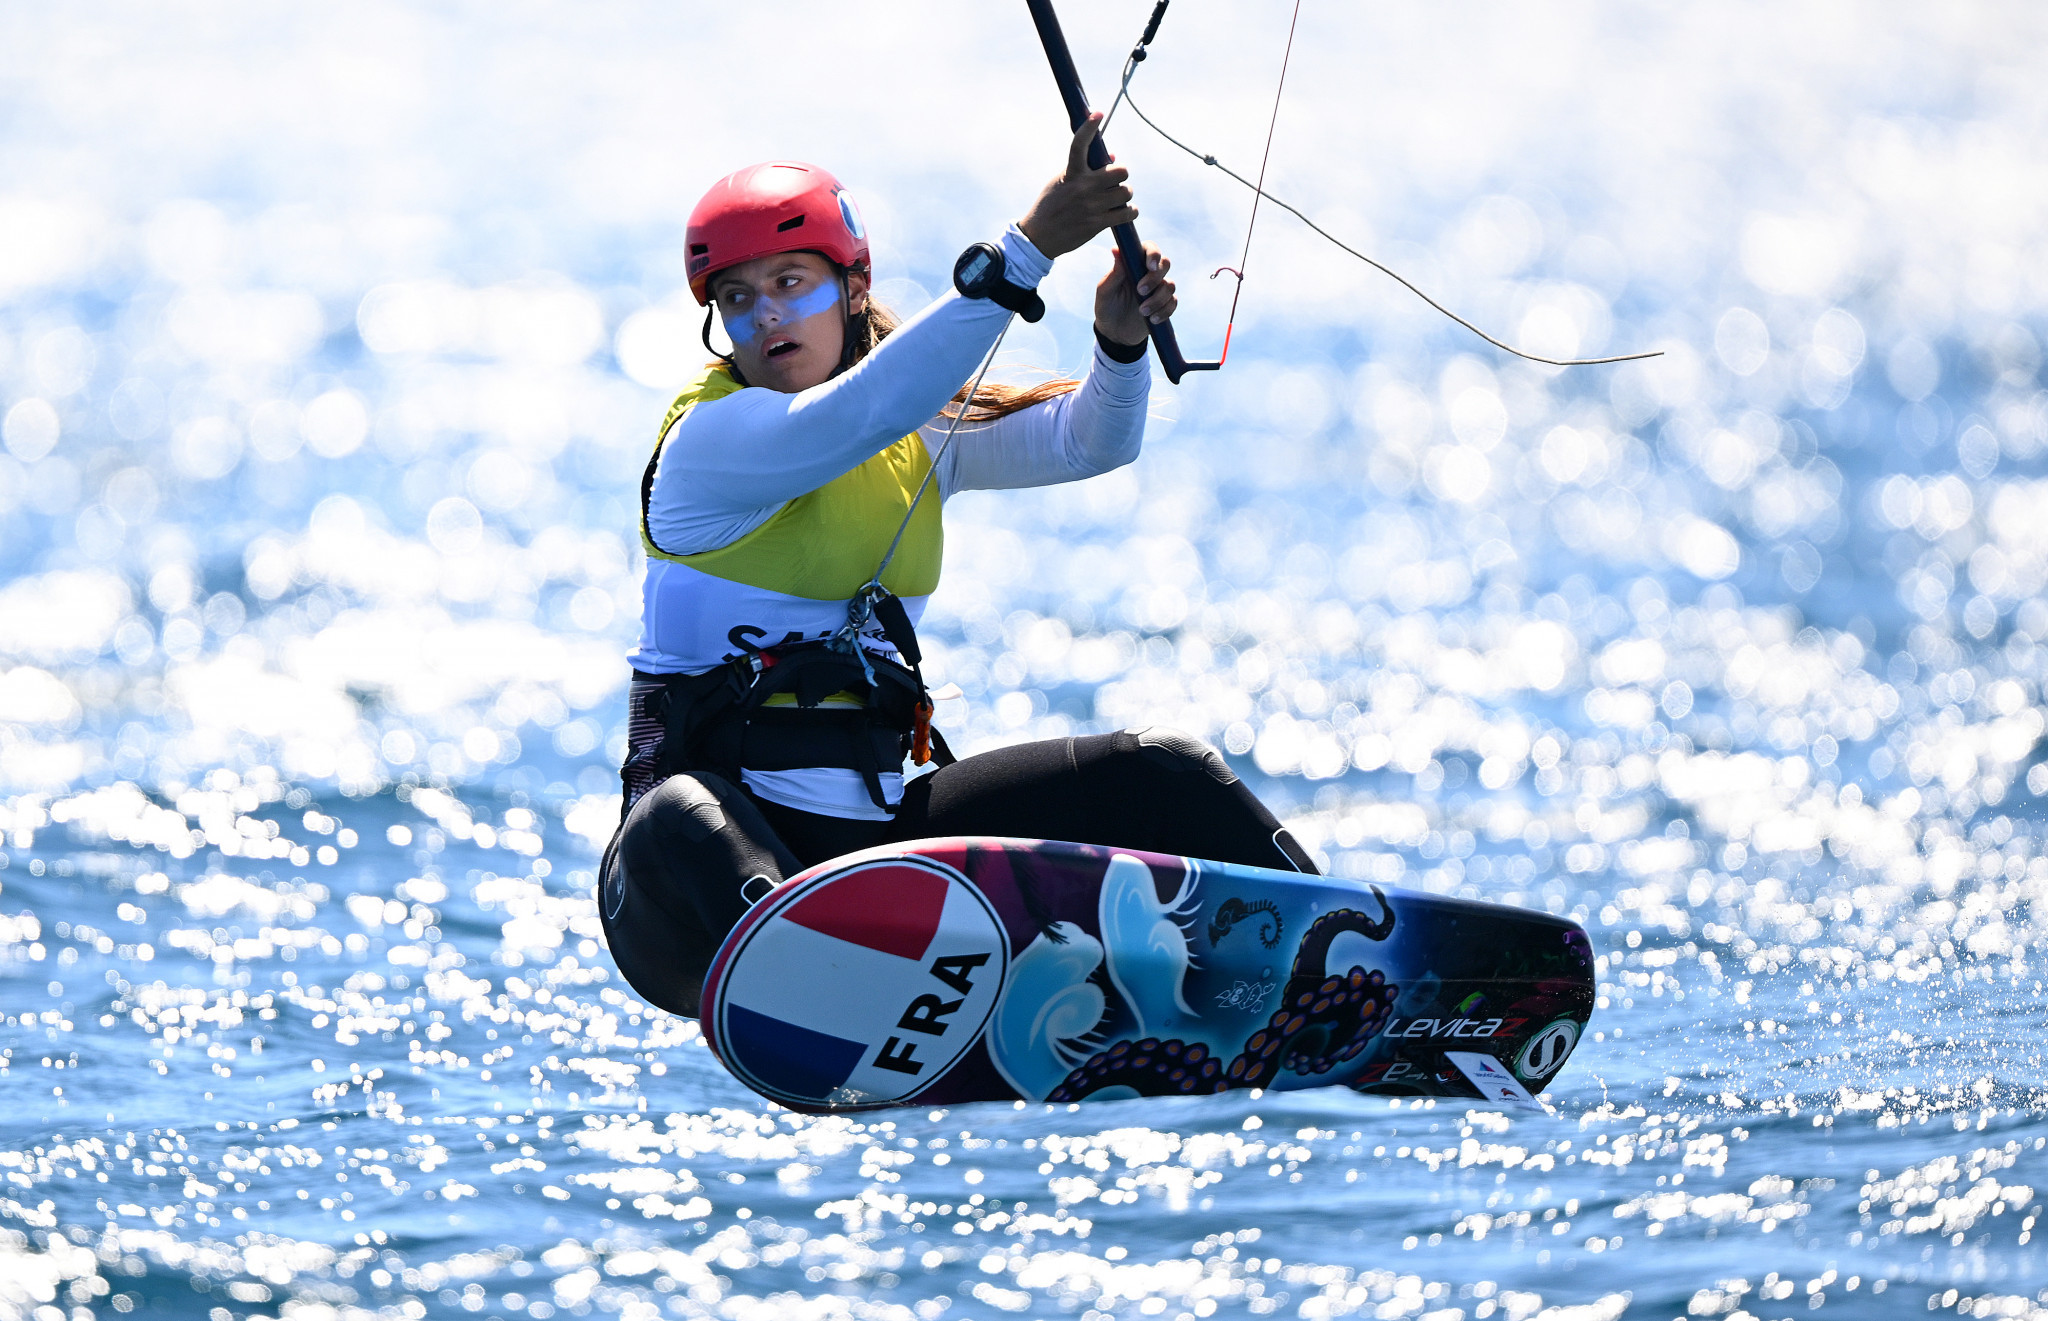 Maeder and Nolot clinch back-to-back KiteFoil World Series wins with victories in Cagliari